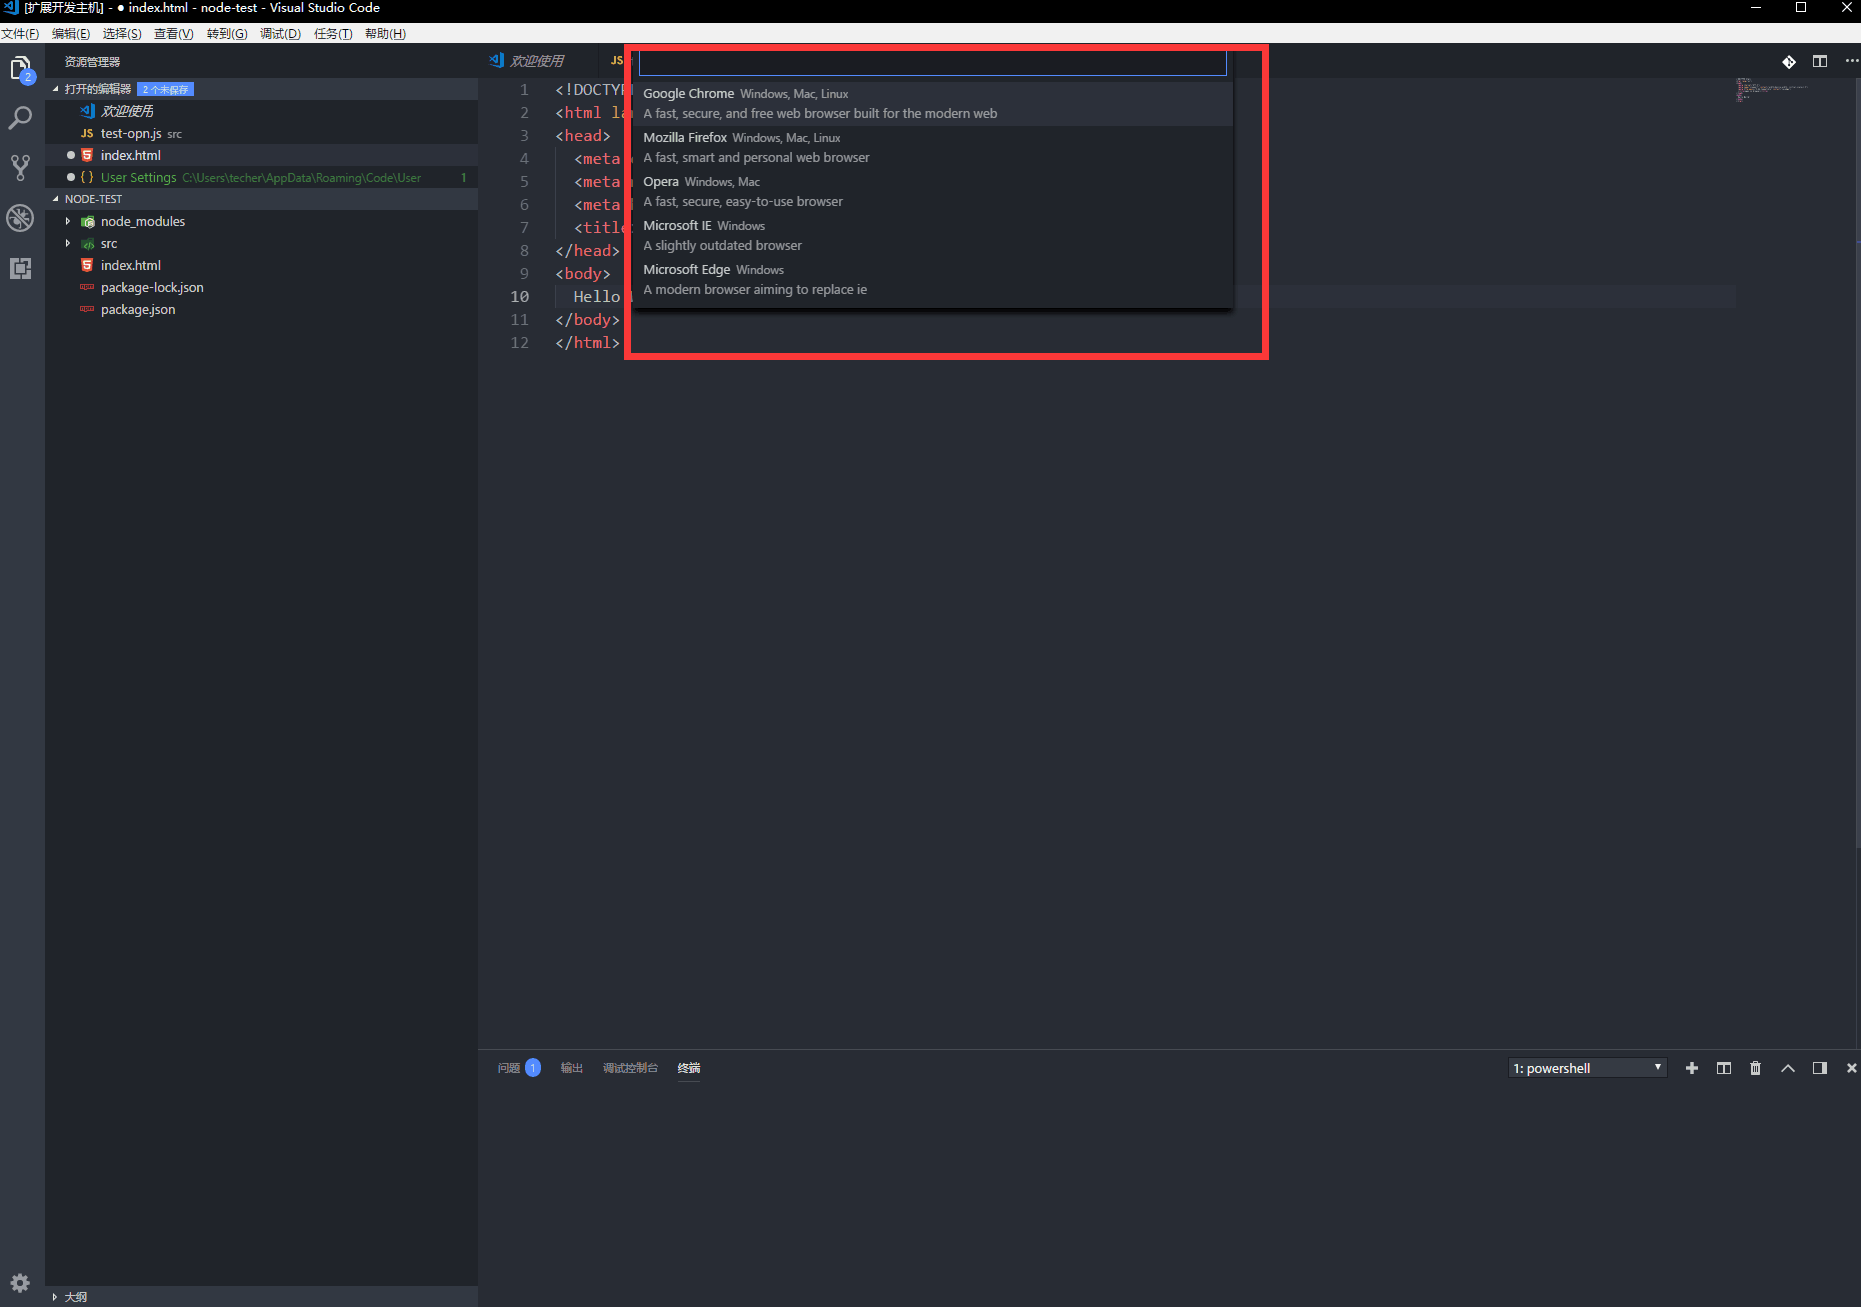 visual studio for mac connecting to visual studio online